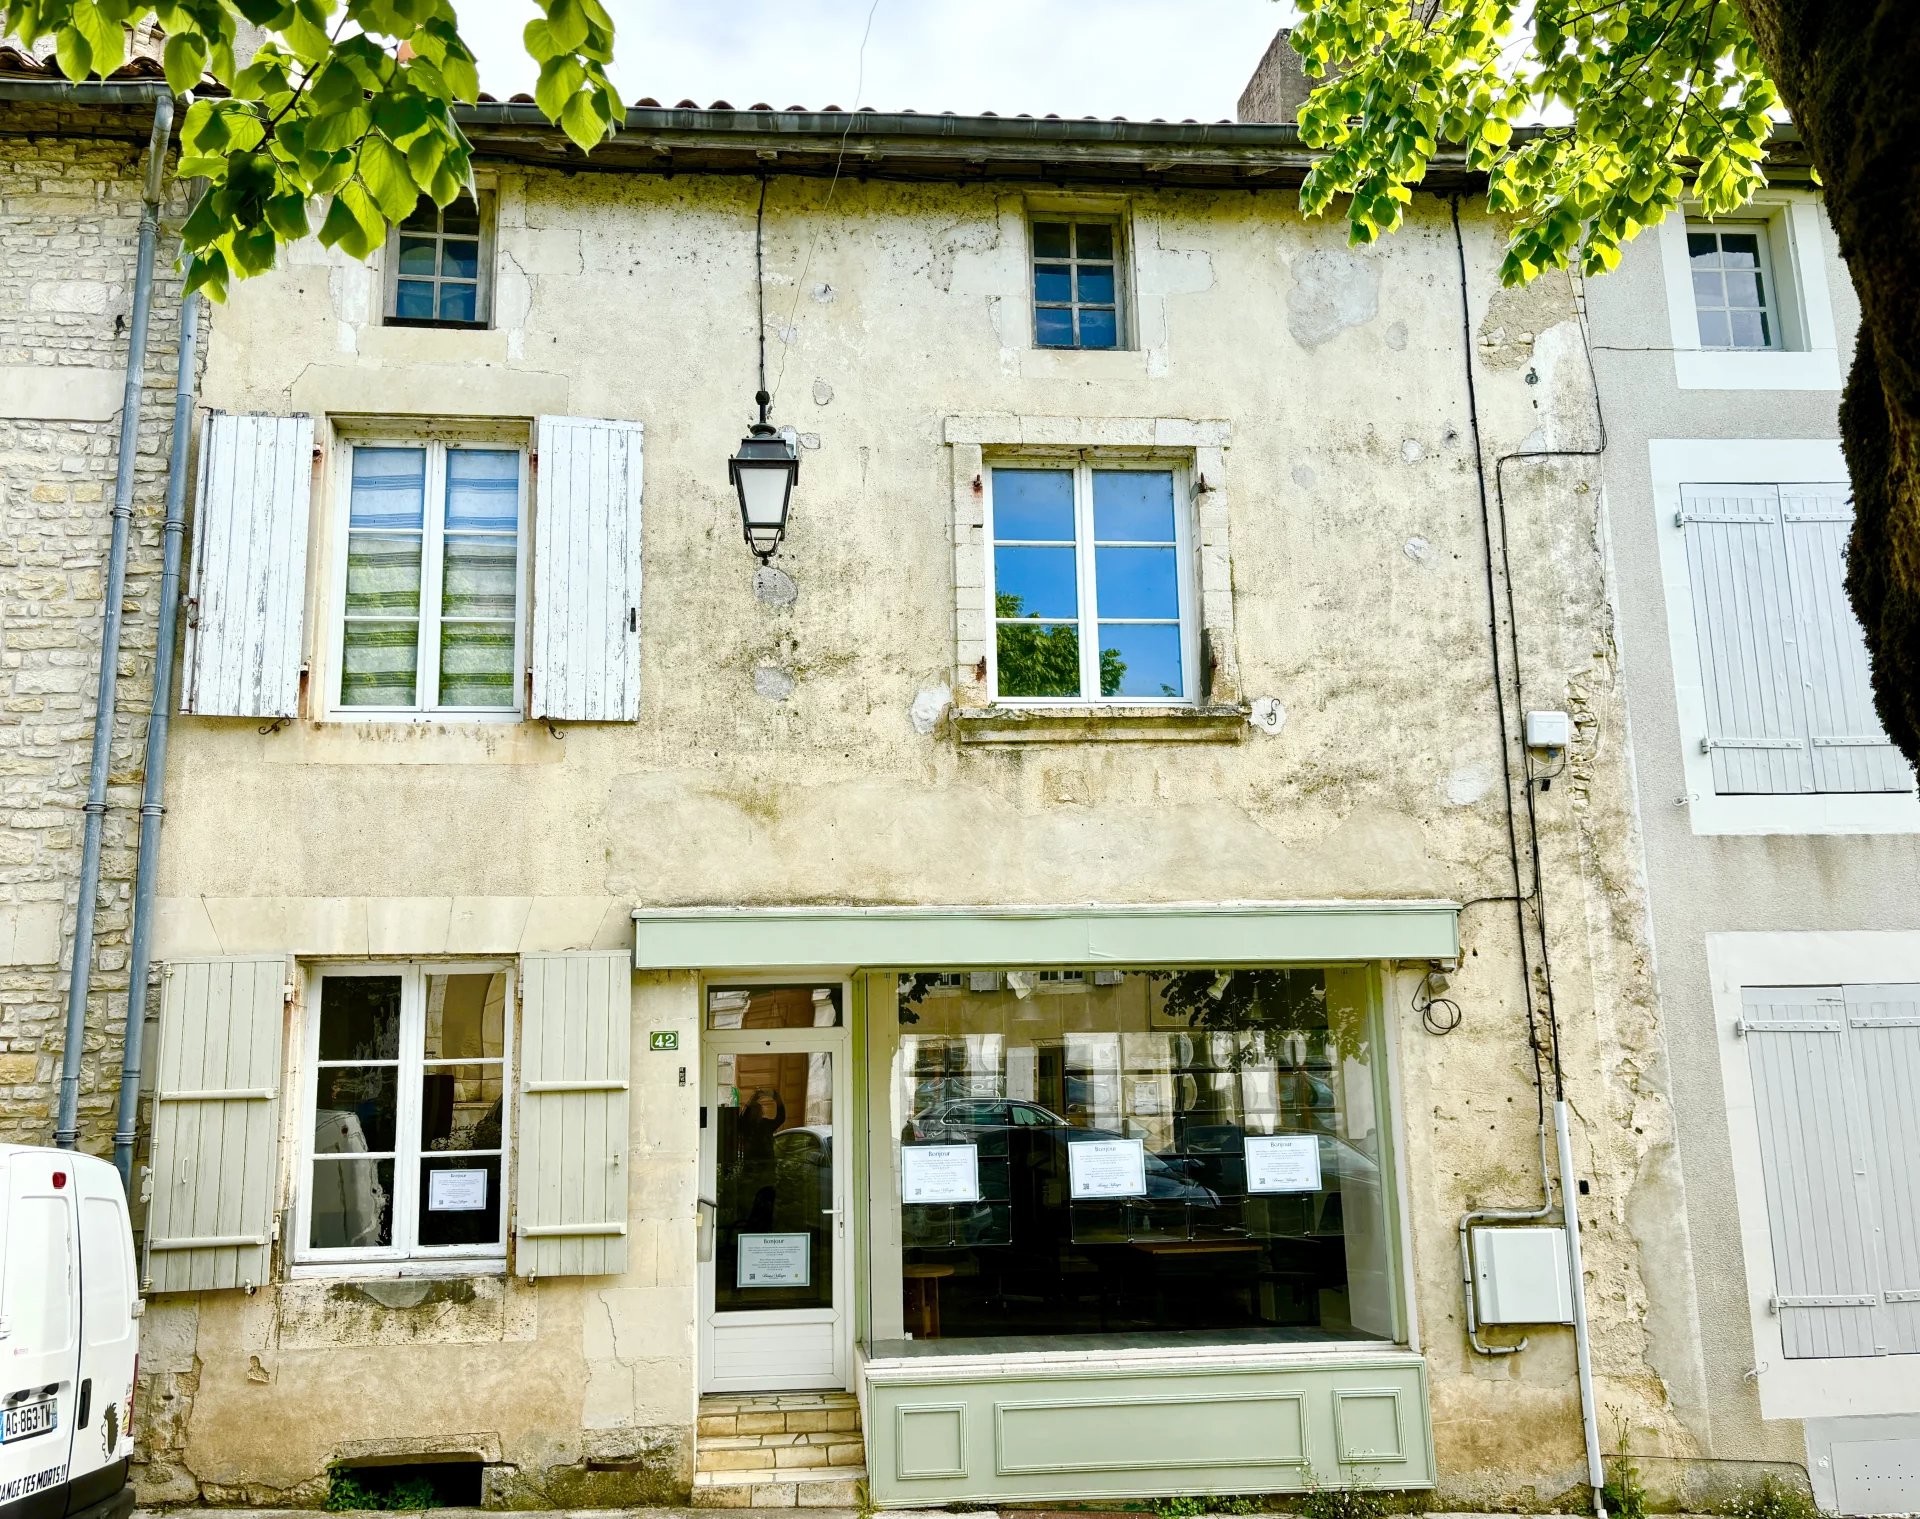 In a stunning village with restaurants/shops - great opportunity to own a shop with an apartment and courtyard